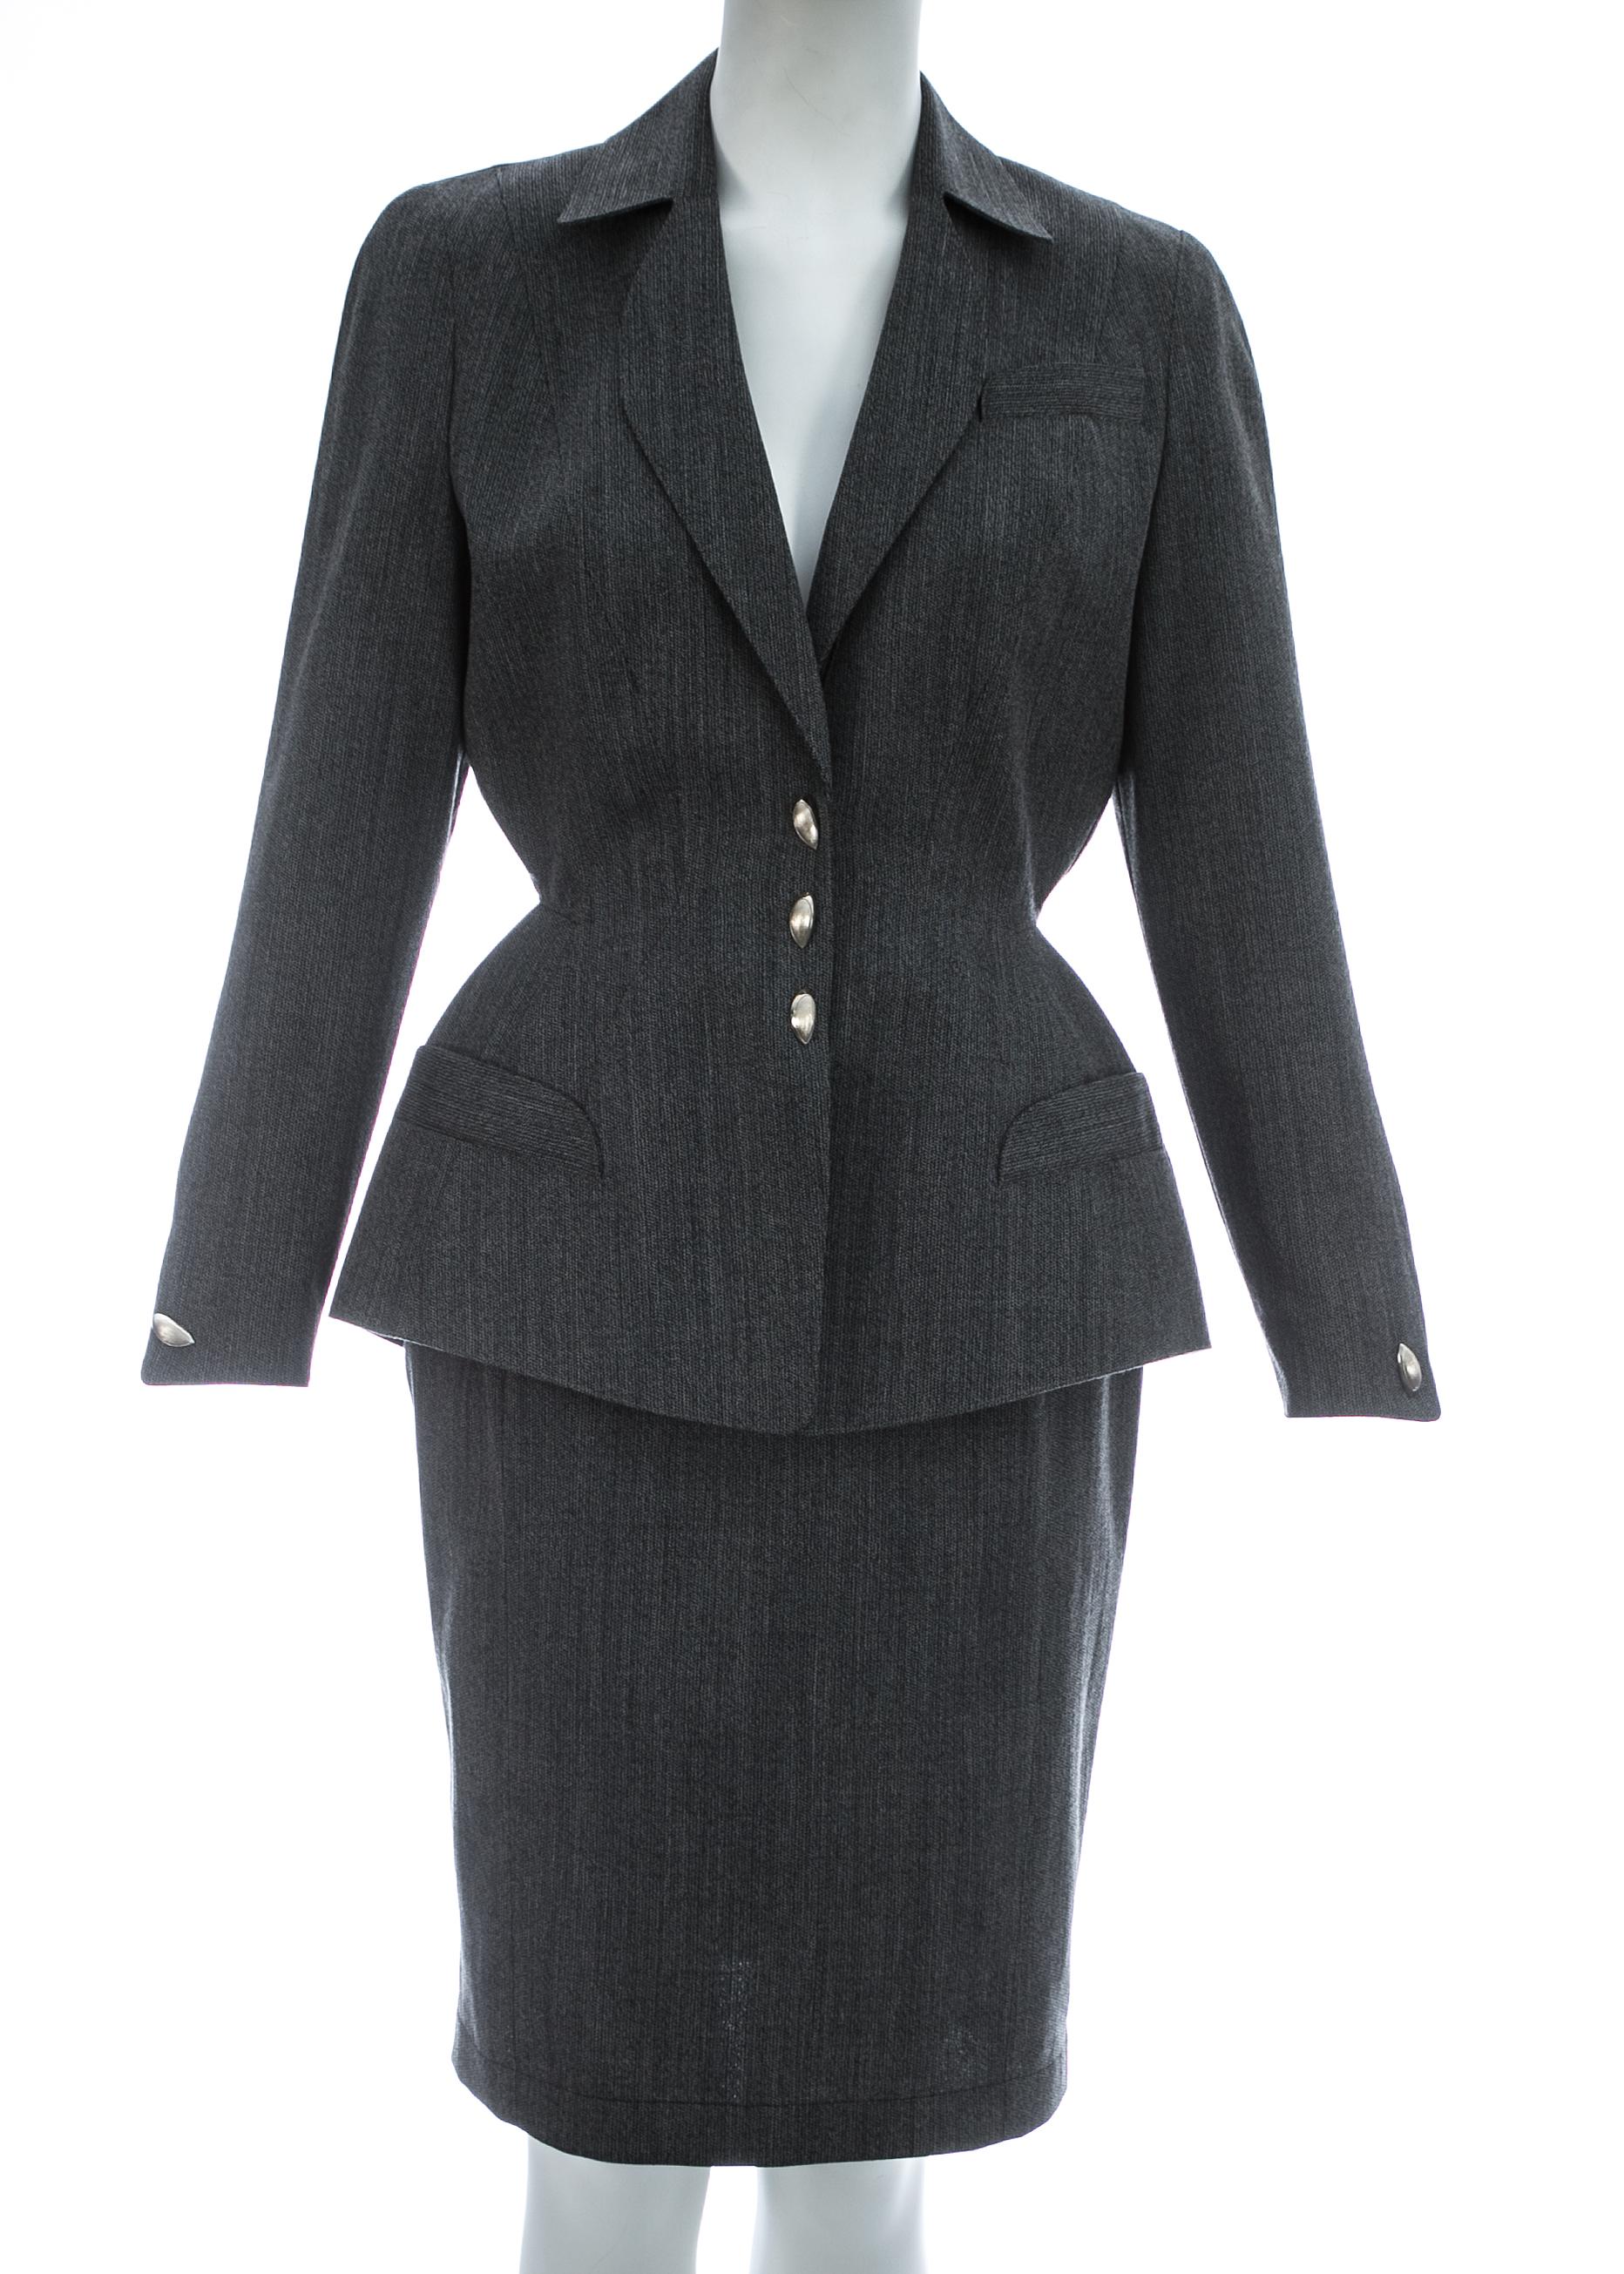 - Structured blazer jacket with cinched waist and exaggerated hips 
- Fitted pencil skirt
- Silver snap button closures

c. 1990s